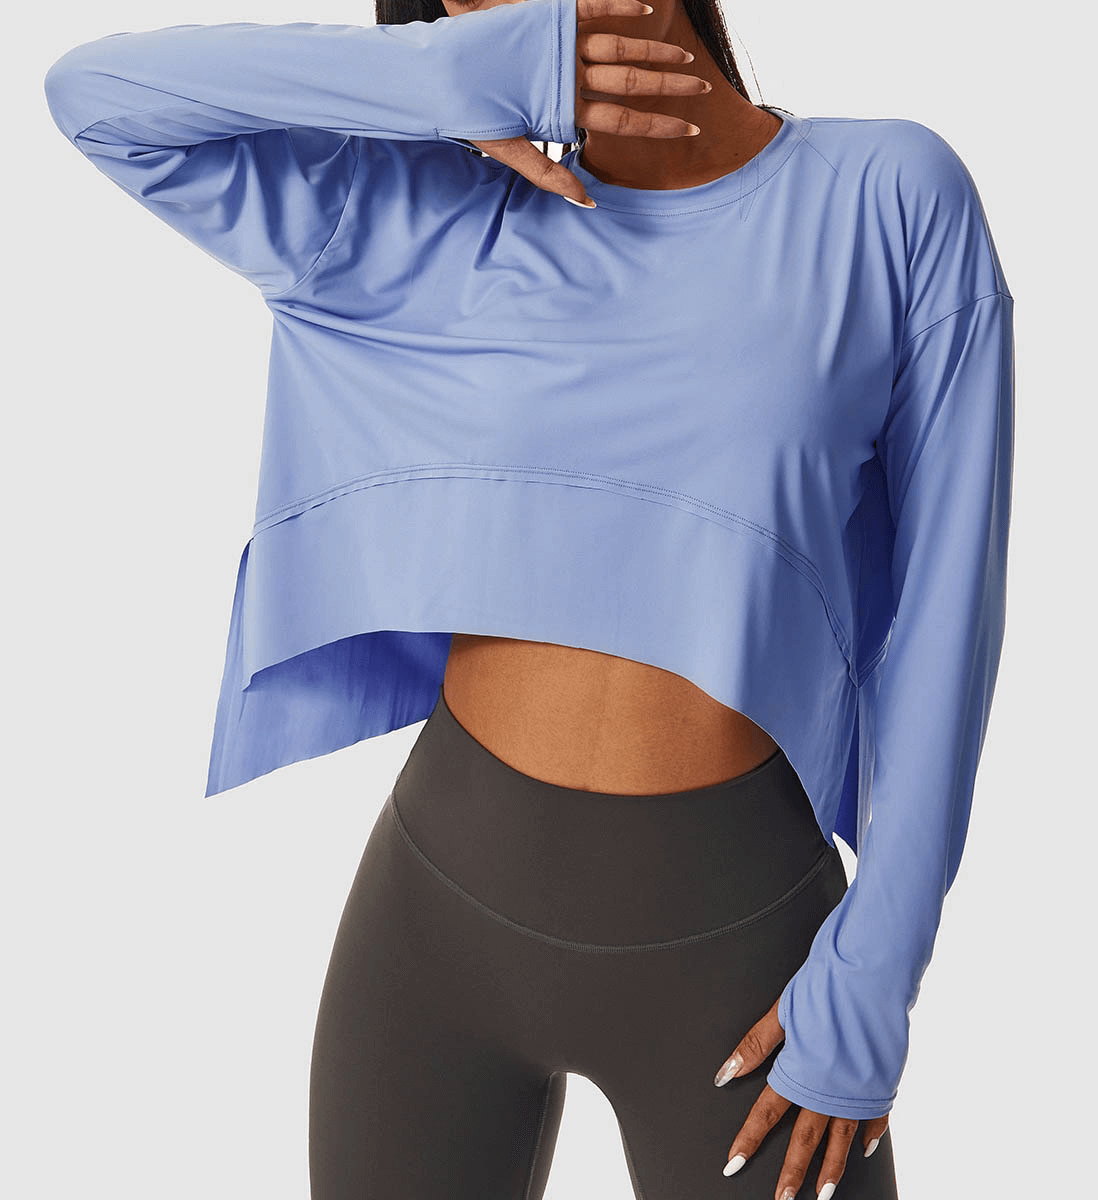 Women's Long Sleeves Quick Dry Gym Workout Top / Training Loose Clothes - SF1004